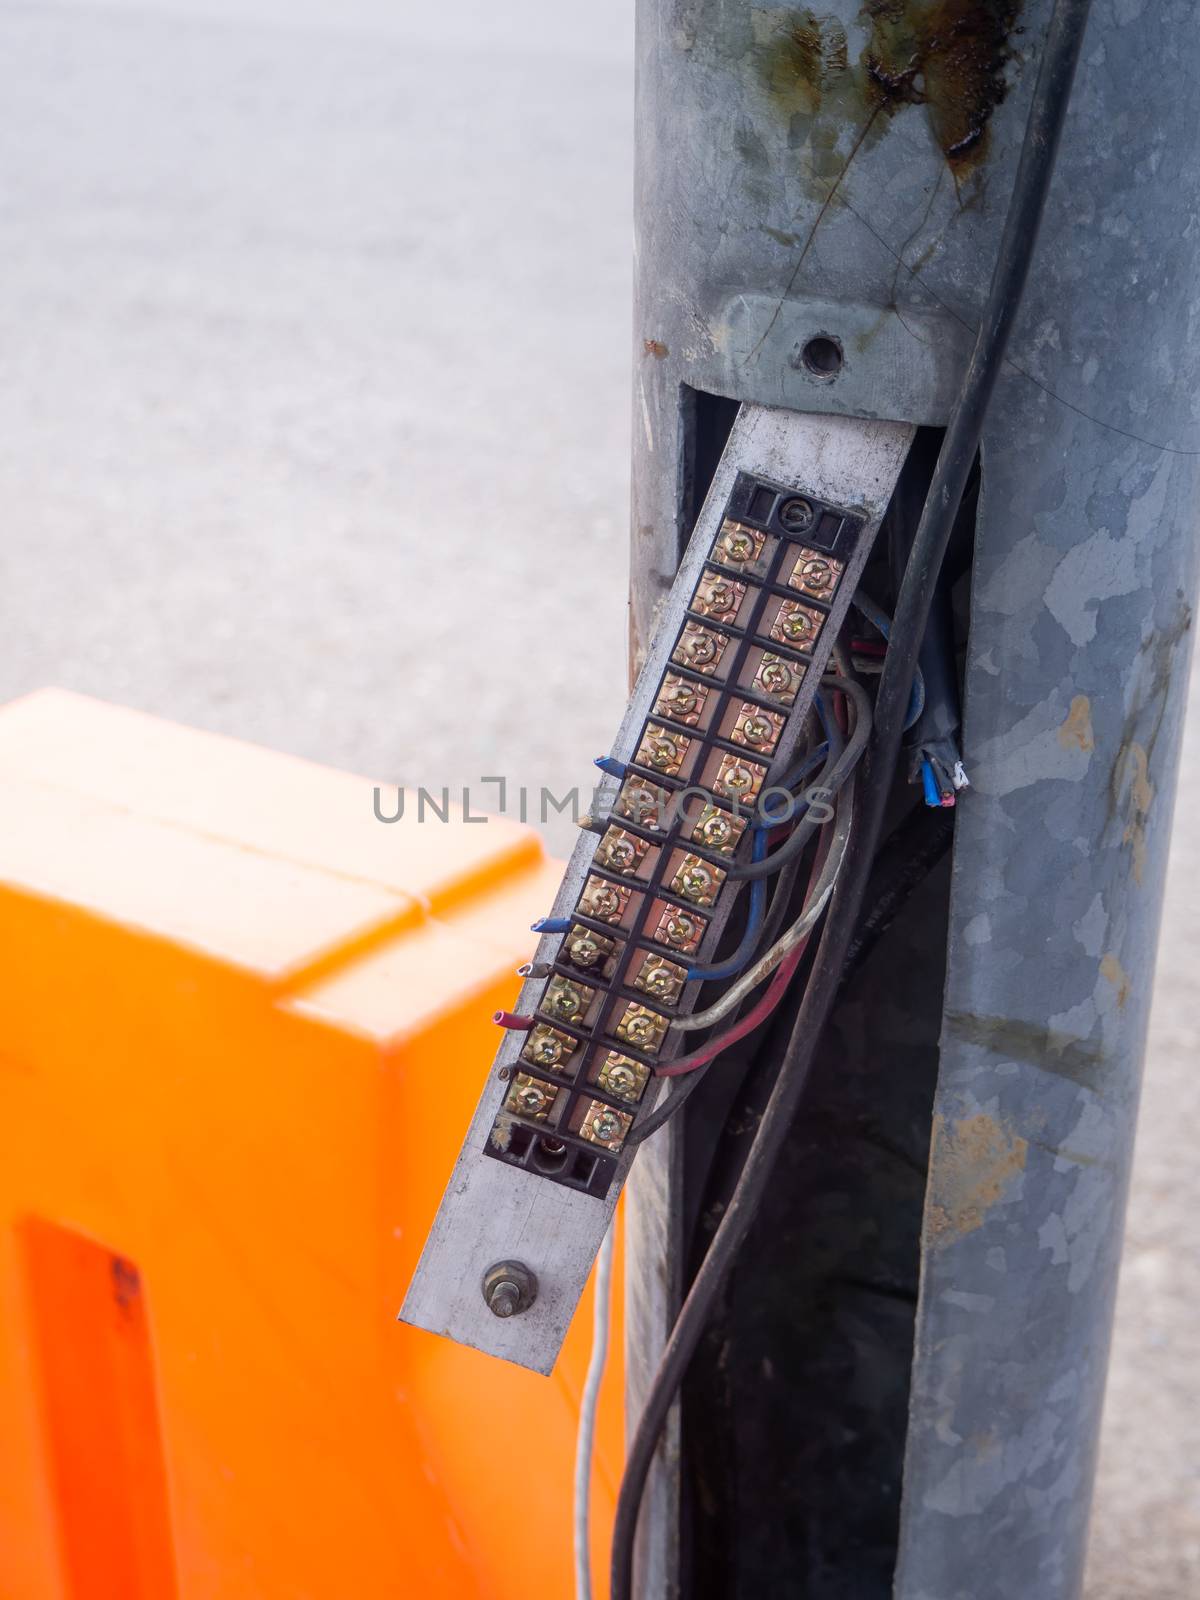 Electric copper bus with connection. Cables connected to an electric terminal